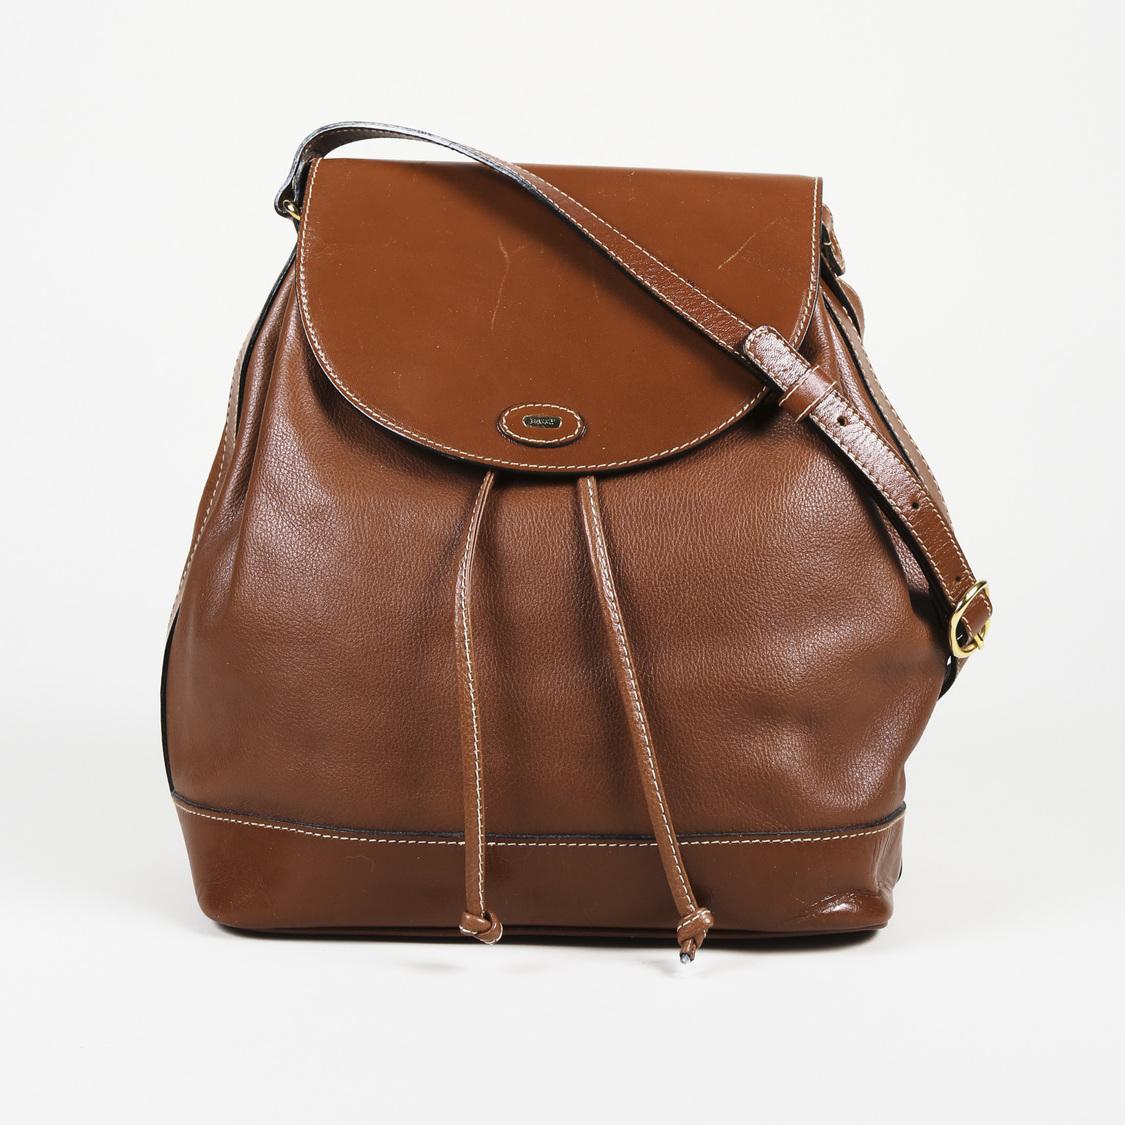 Bally Vintage Leather Crossbody Bag in Brown - Lyst